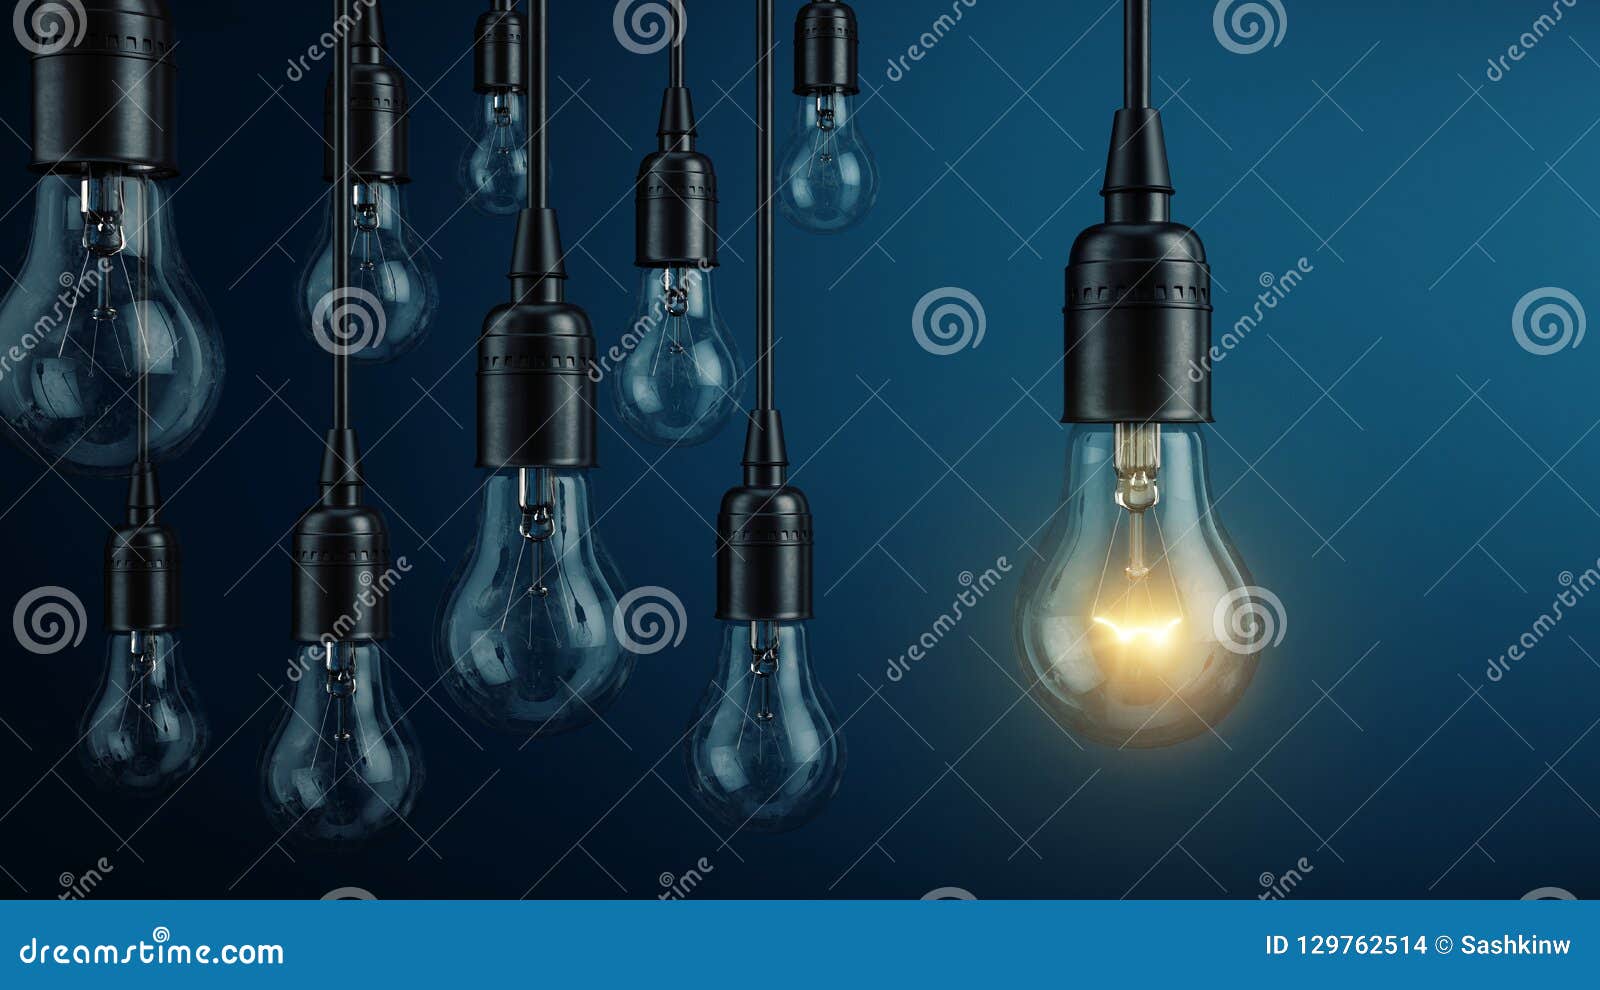 unique, leadership, new idea concept - one light bulb lamp glowing different and standing out from other light bulbs lamps